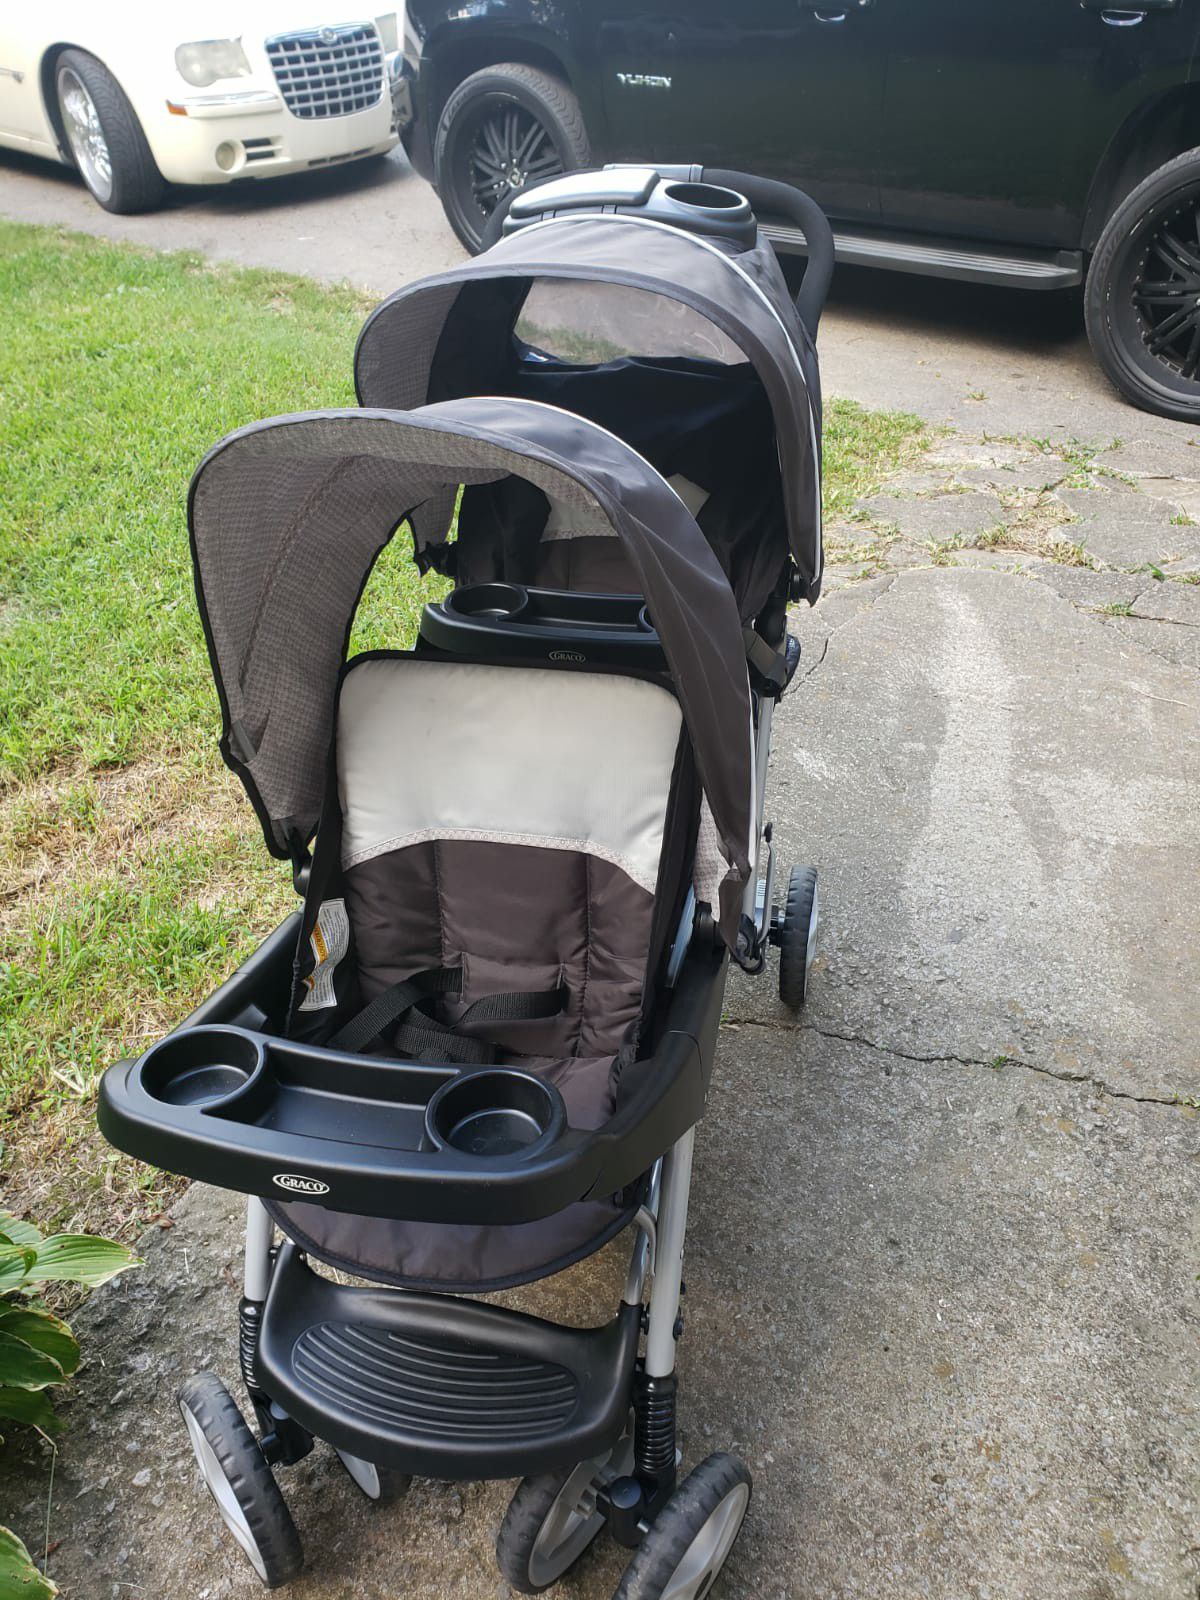 Graco double stroller almost new just use twice